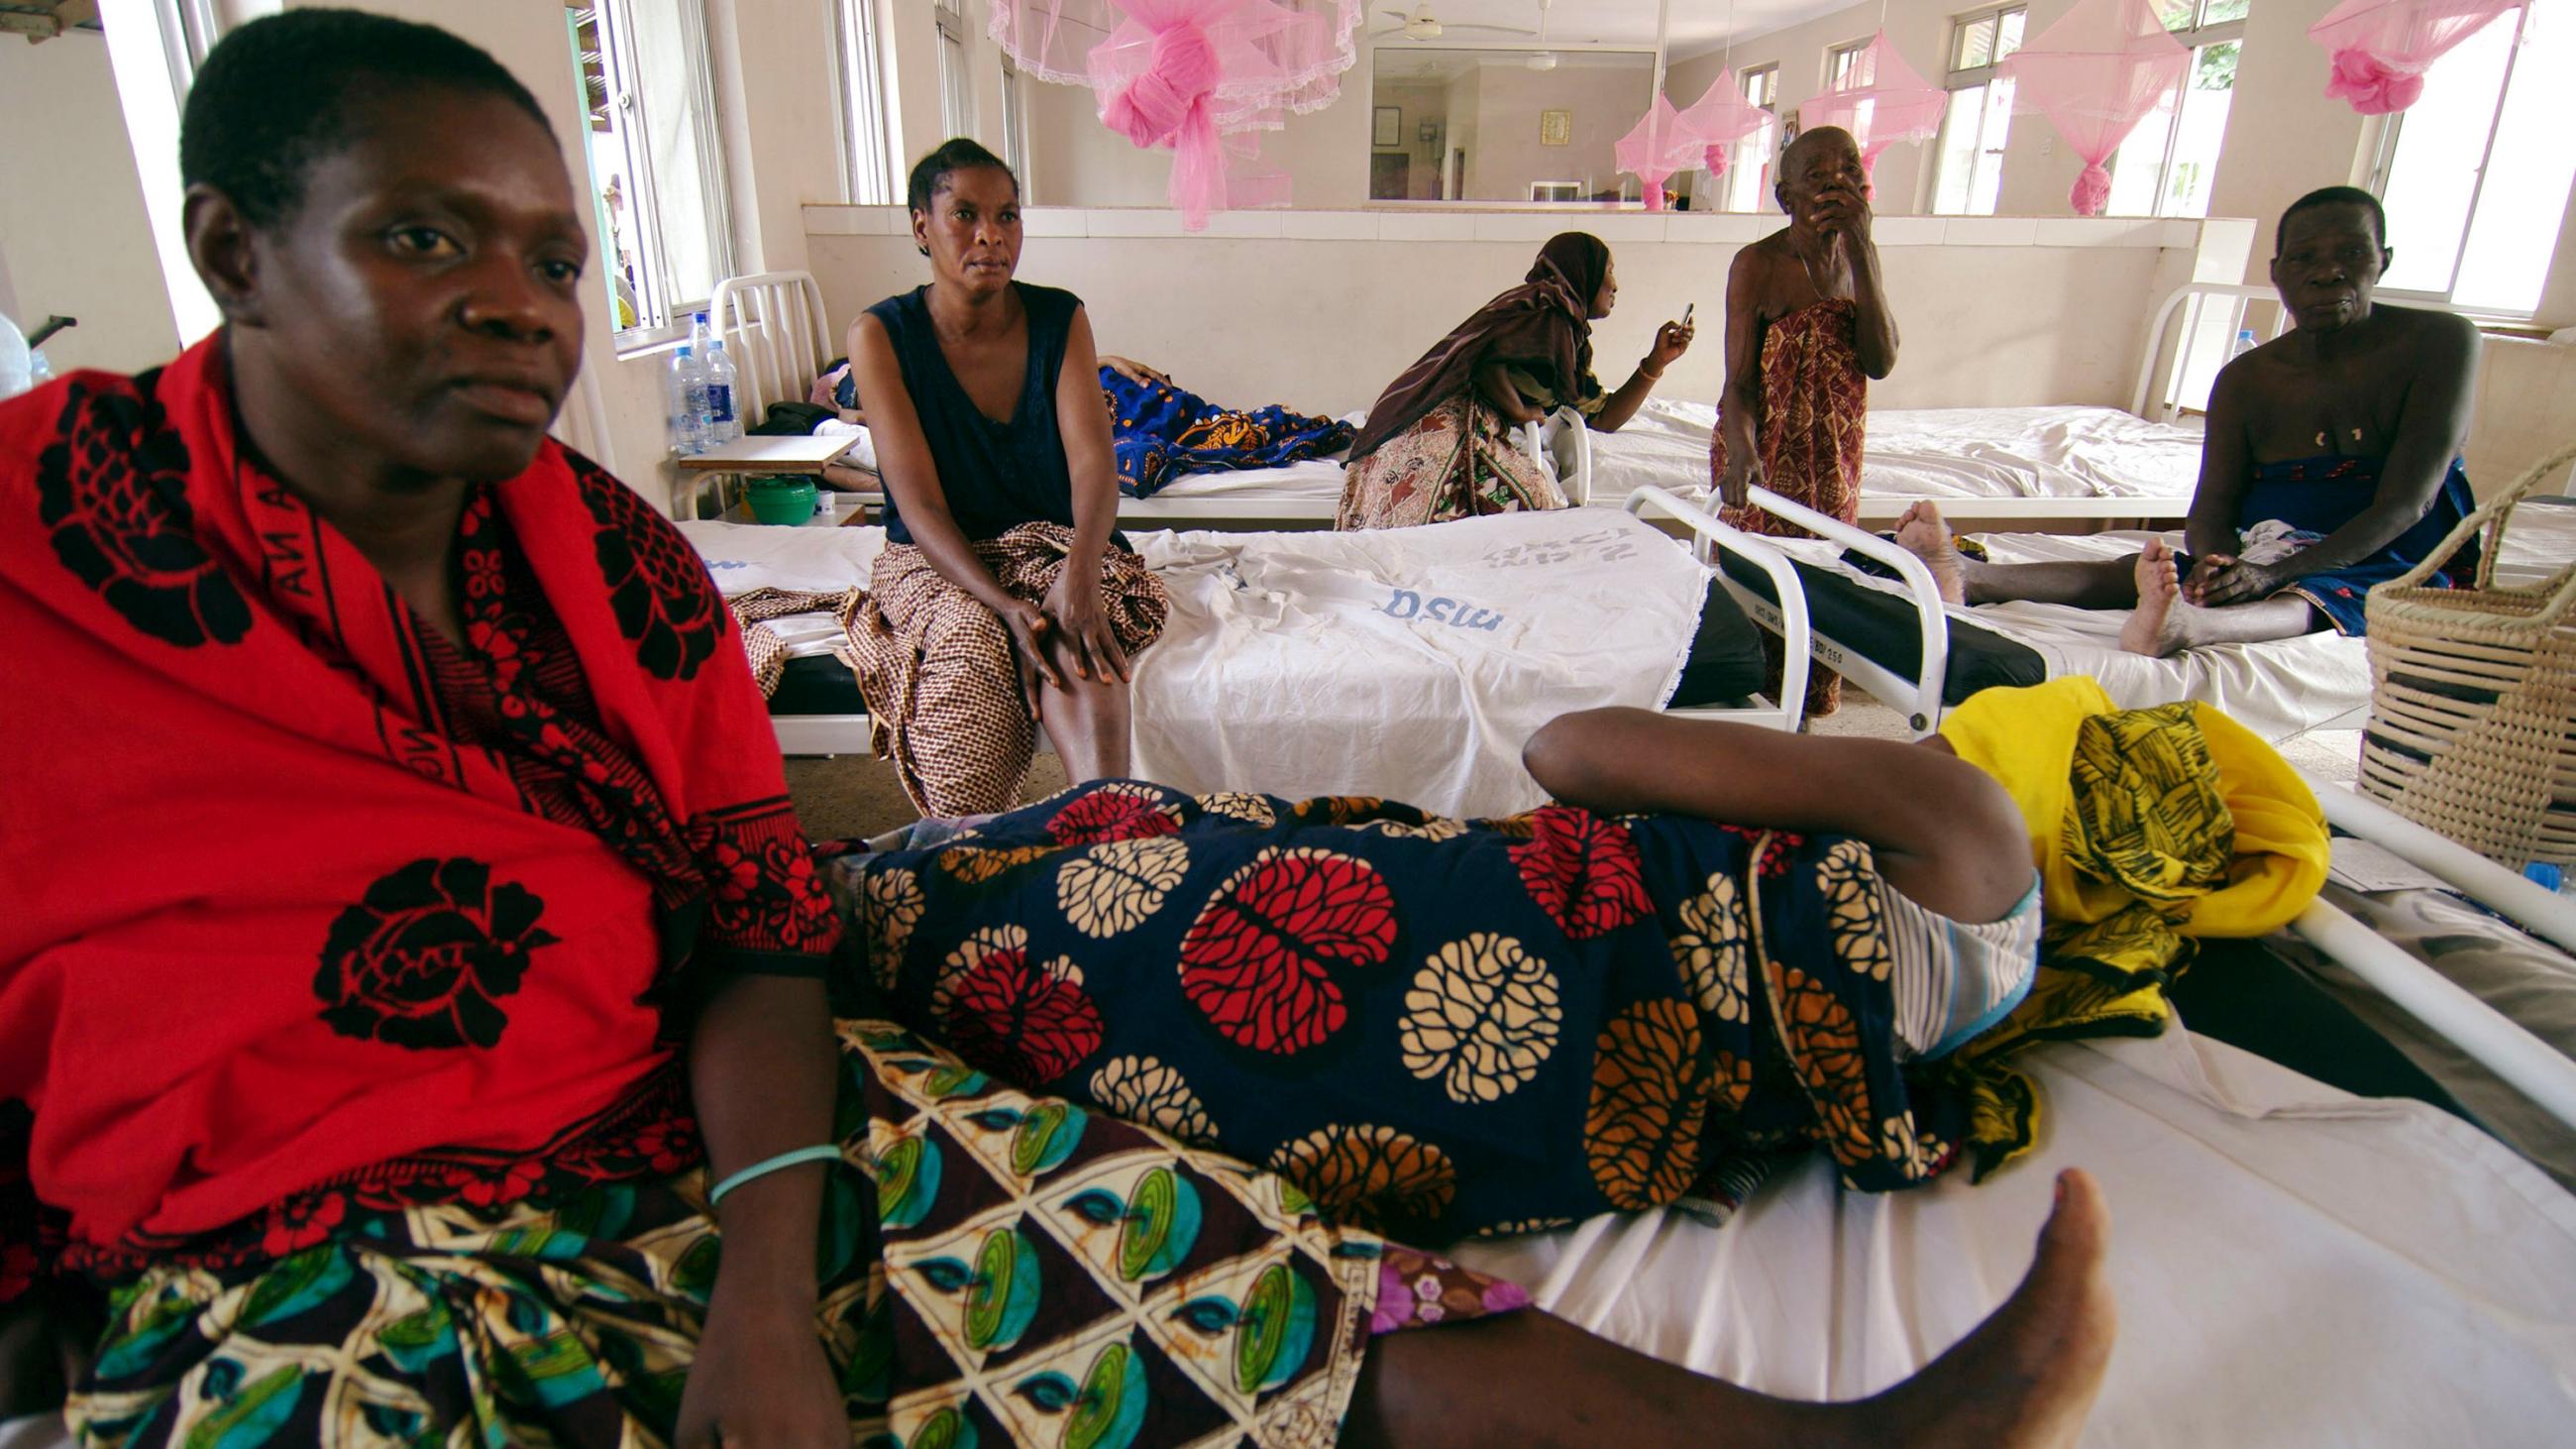 Picture shows Kondogoza in a brightly-colored wrap sitting up in bed while her bedmate stretches out next to her. Several other women can be seen in the background on other beds. 